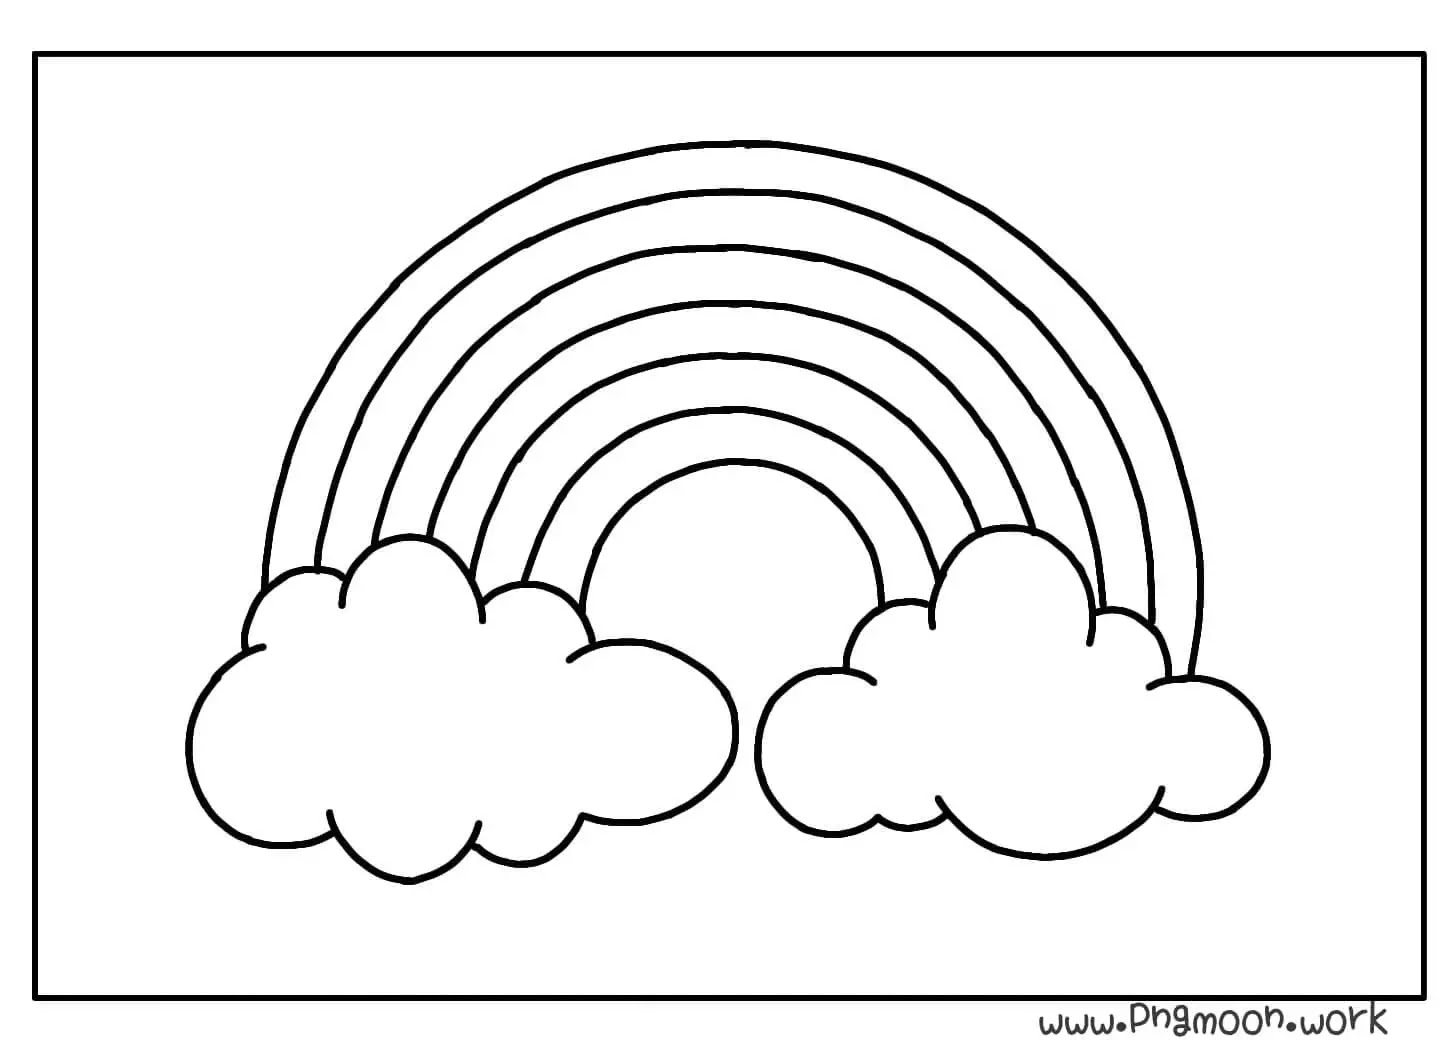 Best 5 Rainbow Coloring pages | Rainbow With Cloud - Pngmoon - Pngmoon ...